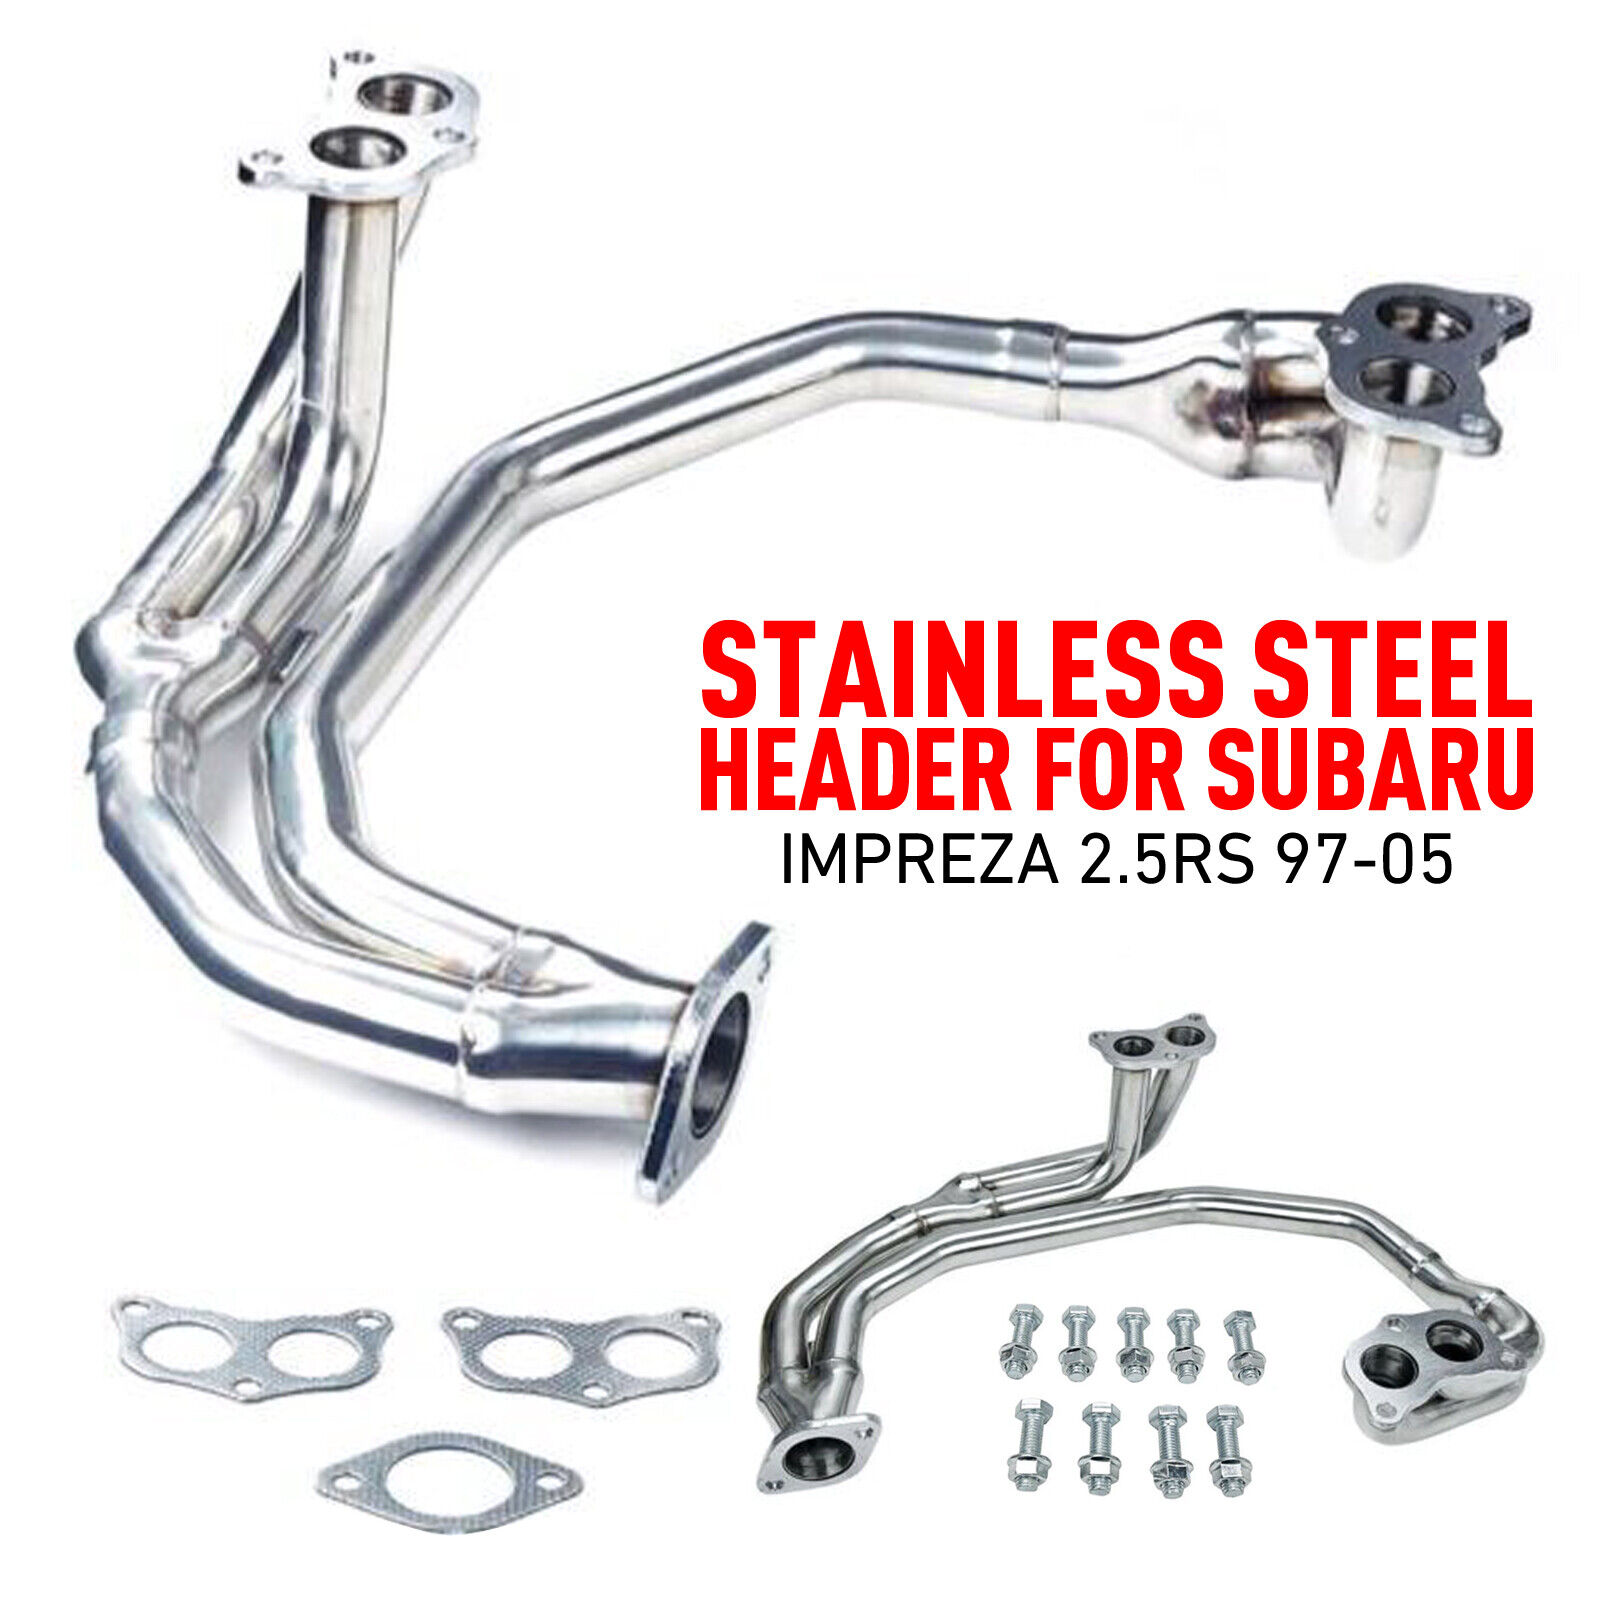 New STAINLESS STEEL HEADER FOR SUBARU IMPREZA 2.5RS 1997-2005fw